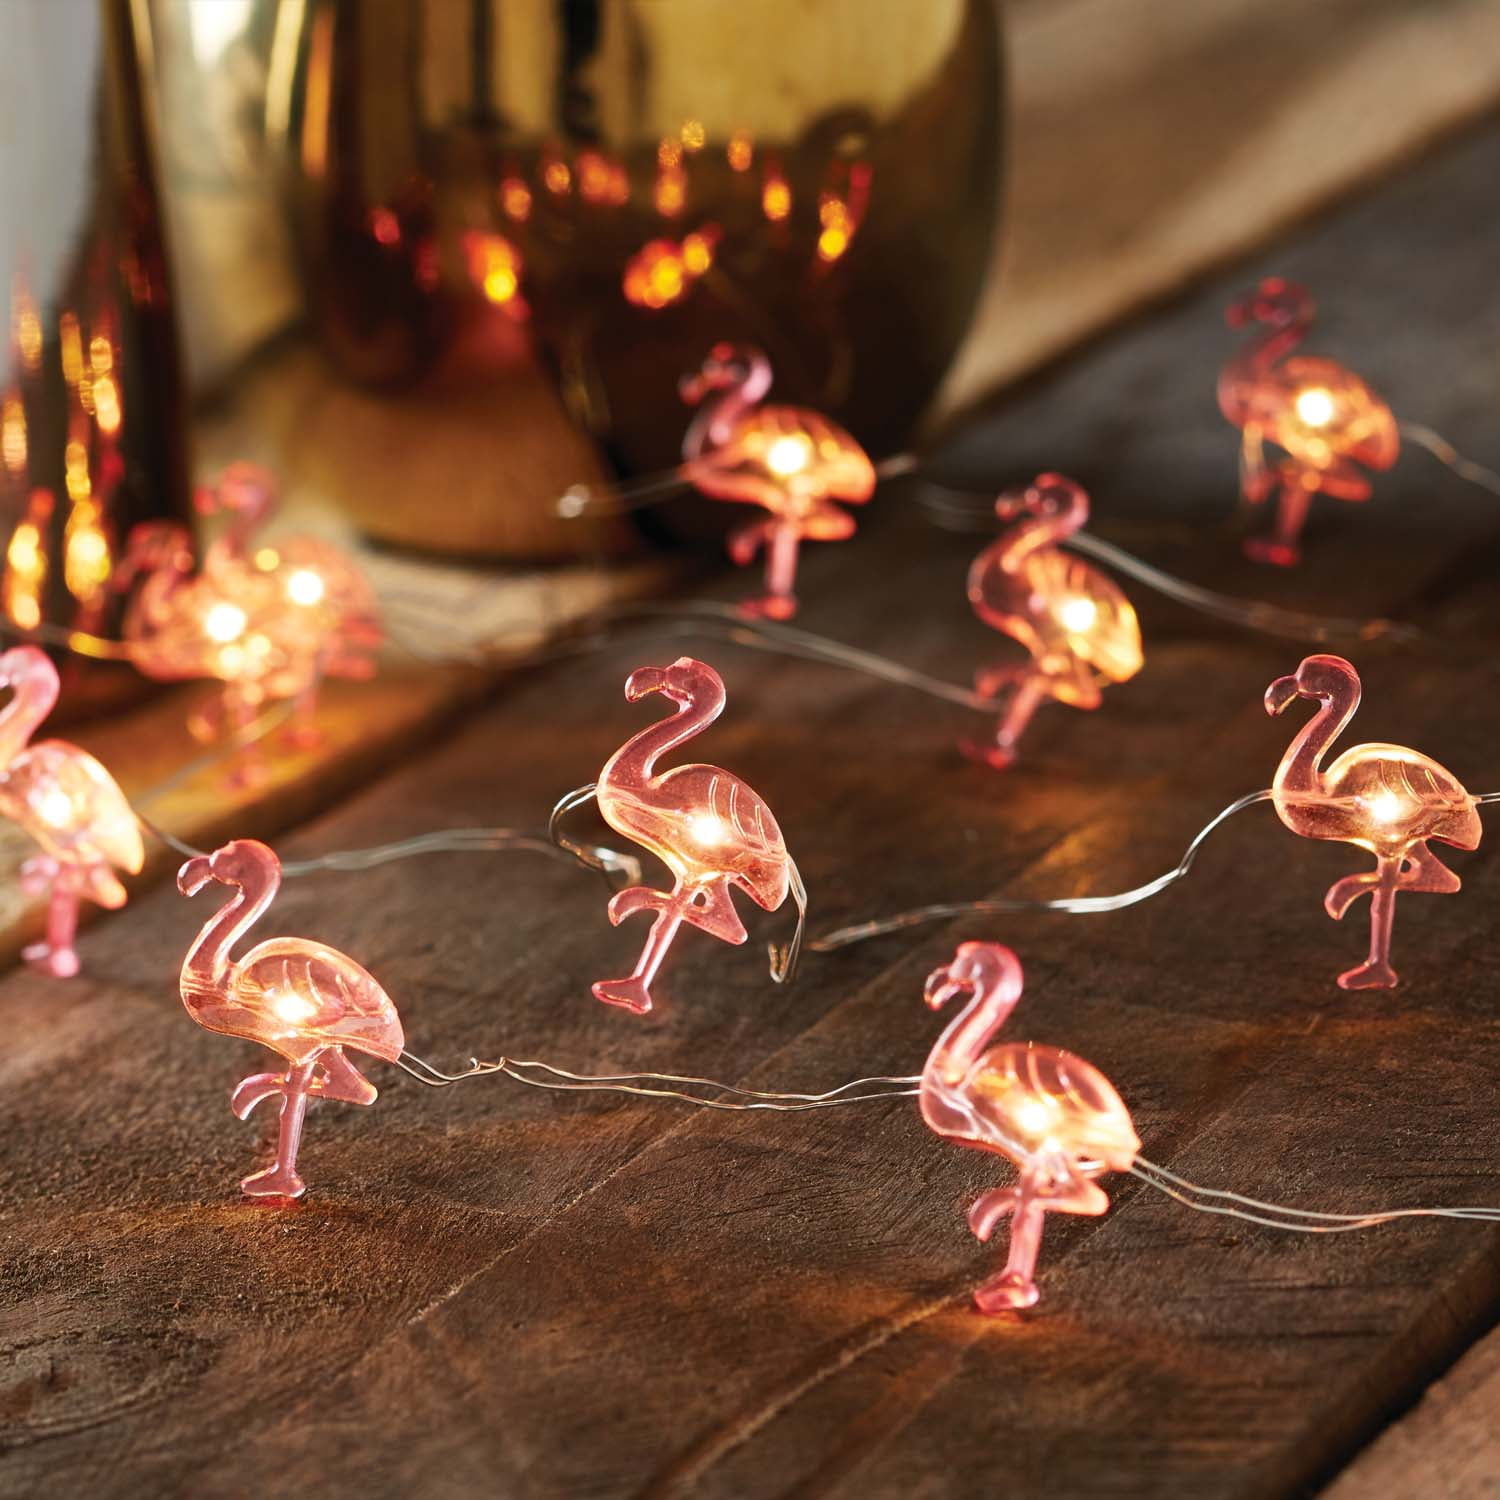 Mainstays 6ft Flamingo Indoor LED Fairy String Lights with Battery Operated Automatic Timer - 18 LED Lights